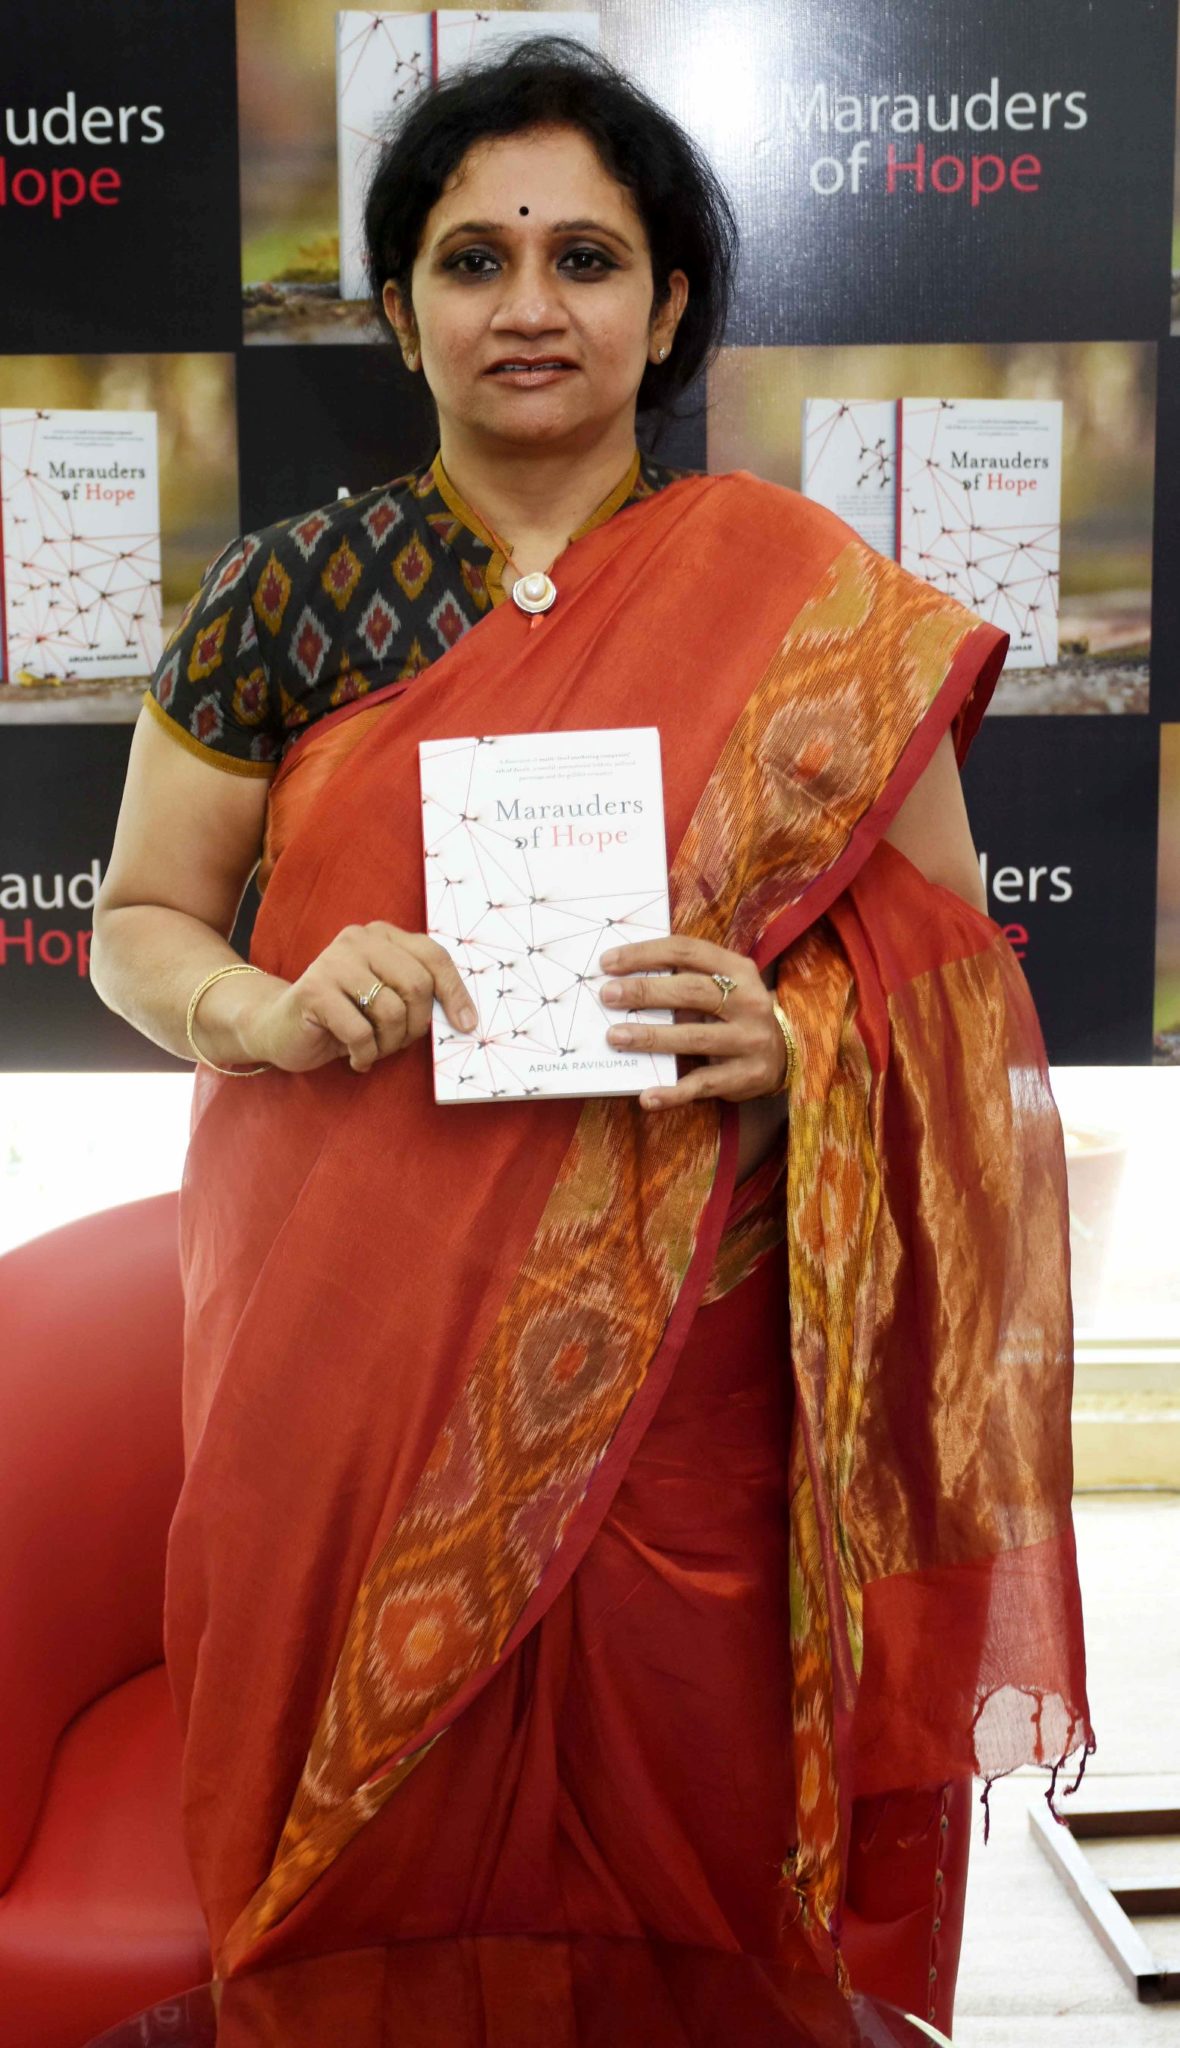 ‘Marauders of Hope’ launched in Jaipur by Author Aruna Ravikumar decoding=